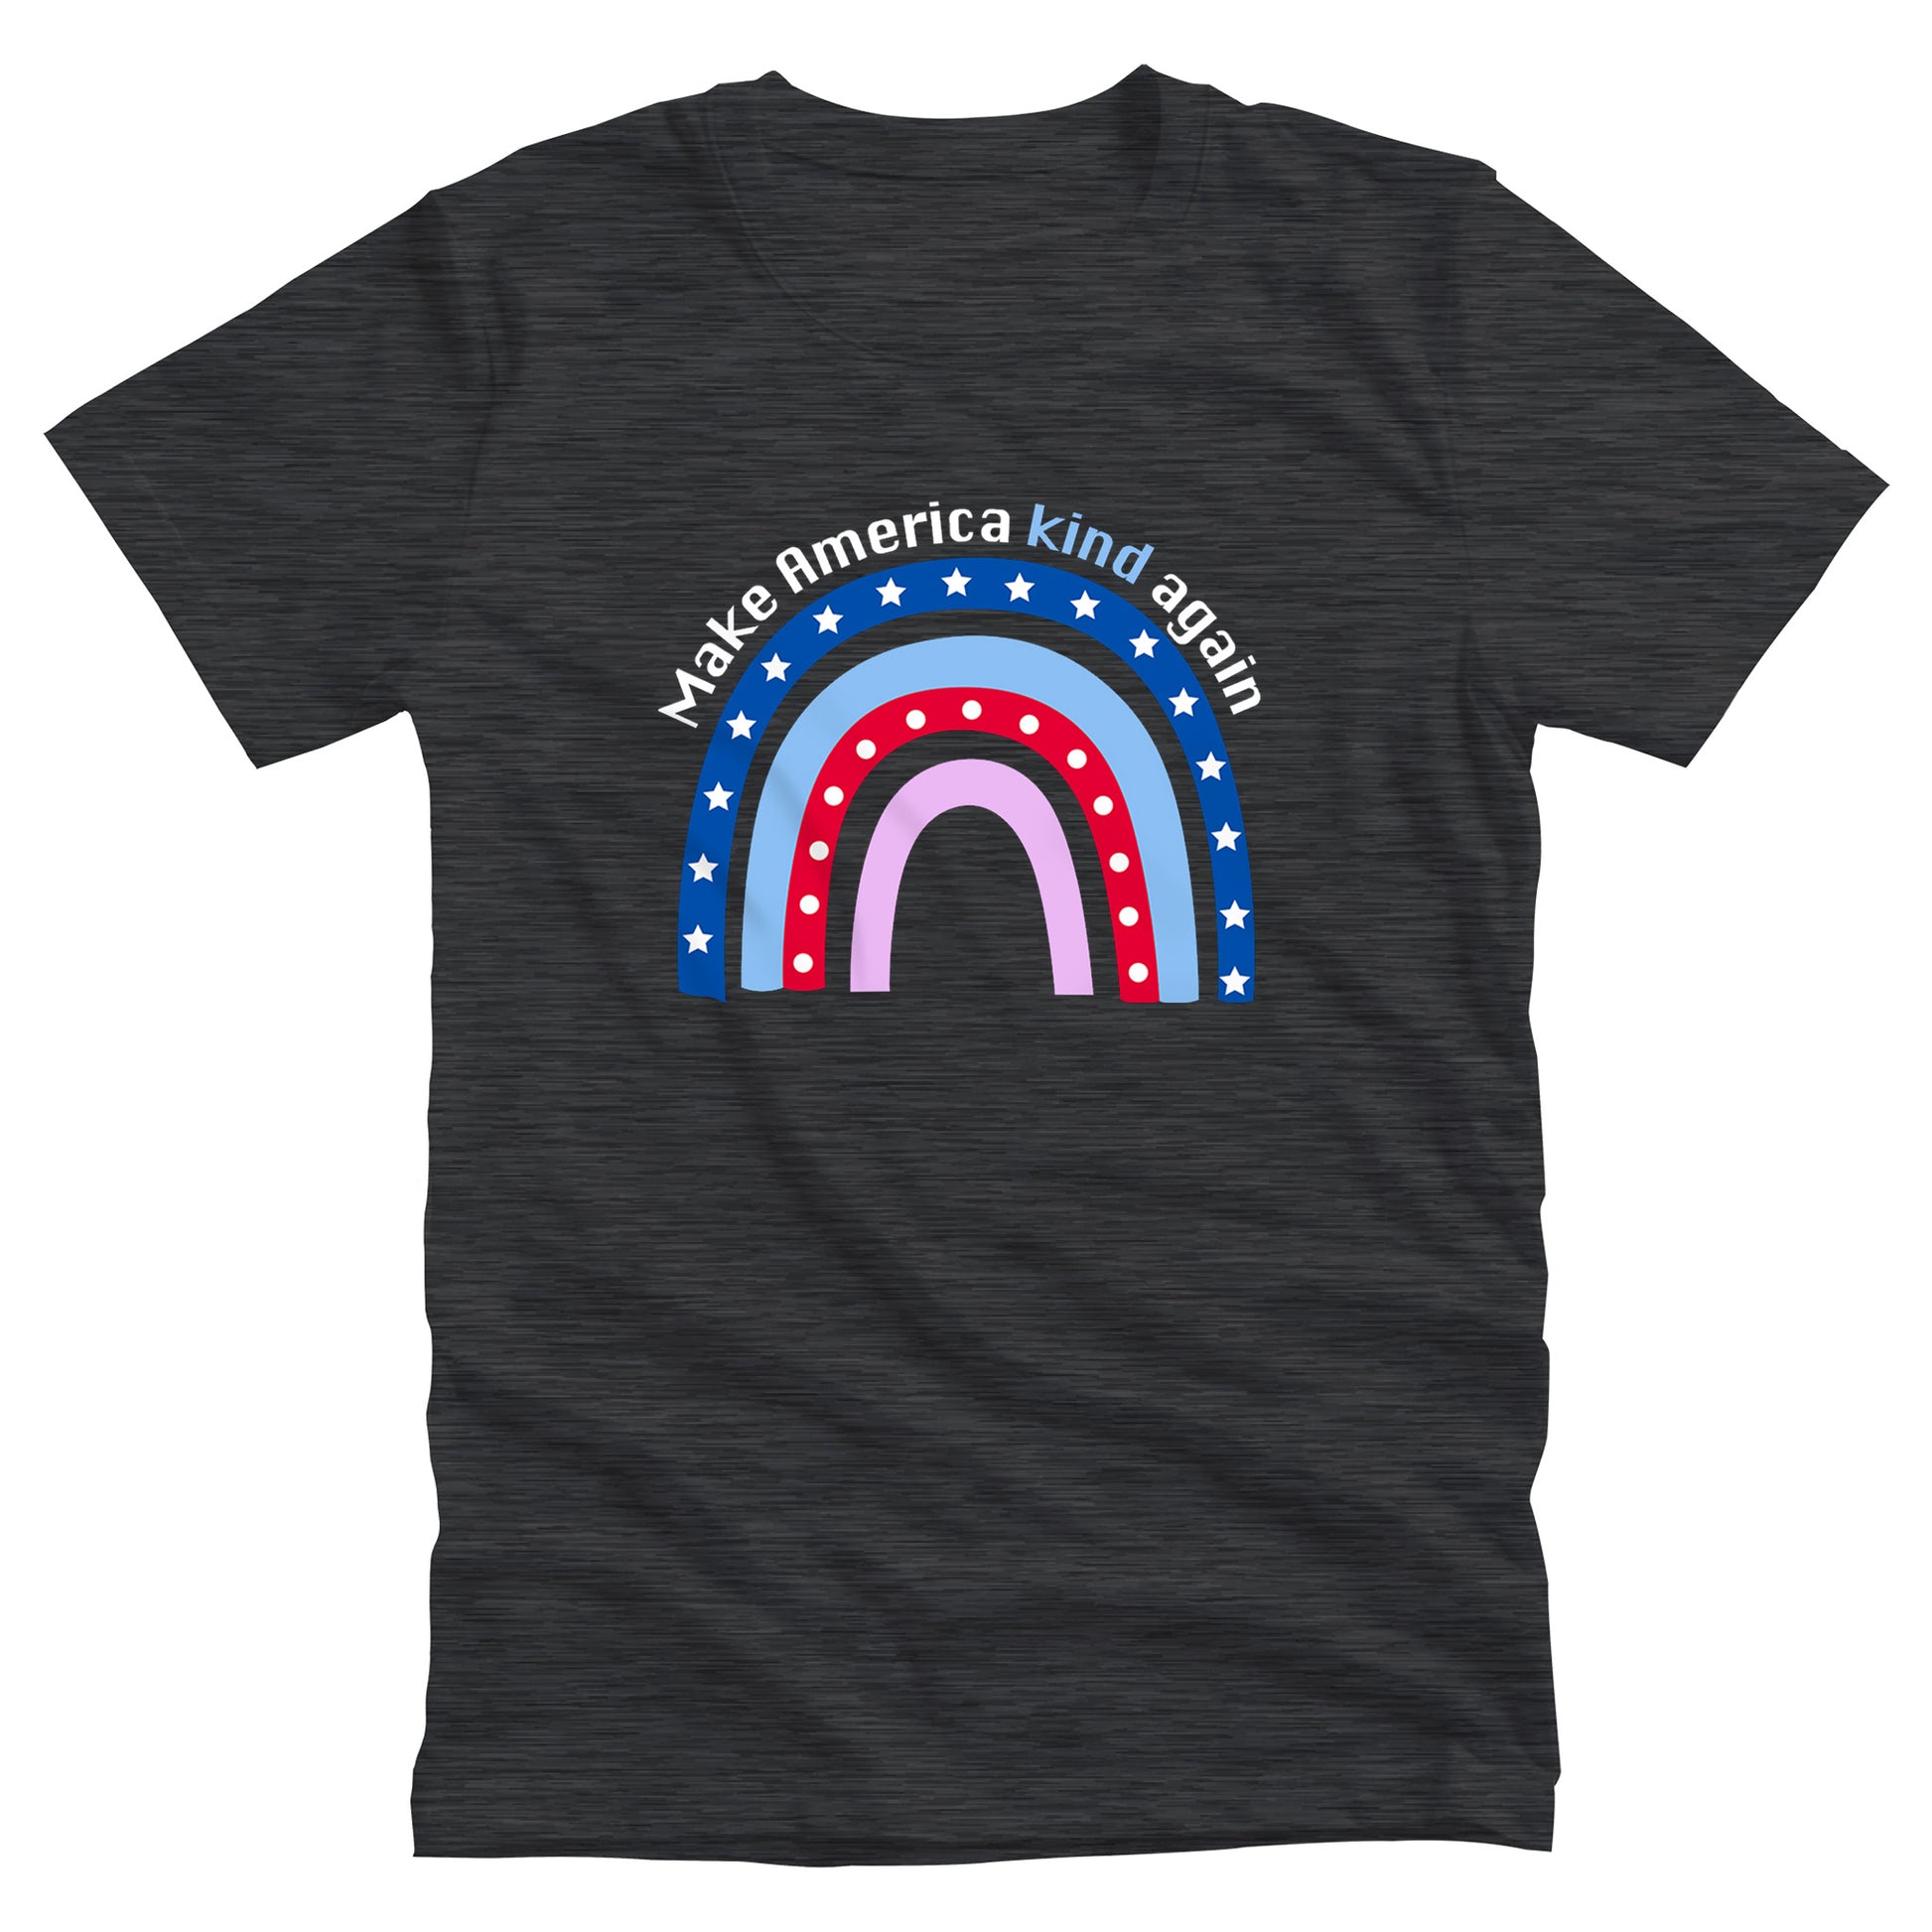 Dark Grey Heather color unisex t-shirt with a graphic of a red and blue rainbow with text arched over the top that says, “Make America Kind Again”.